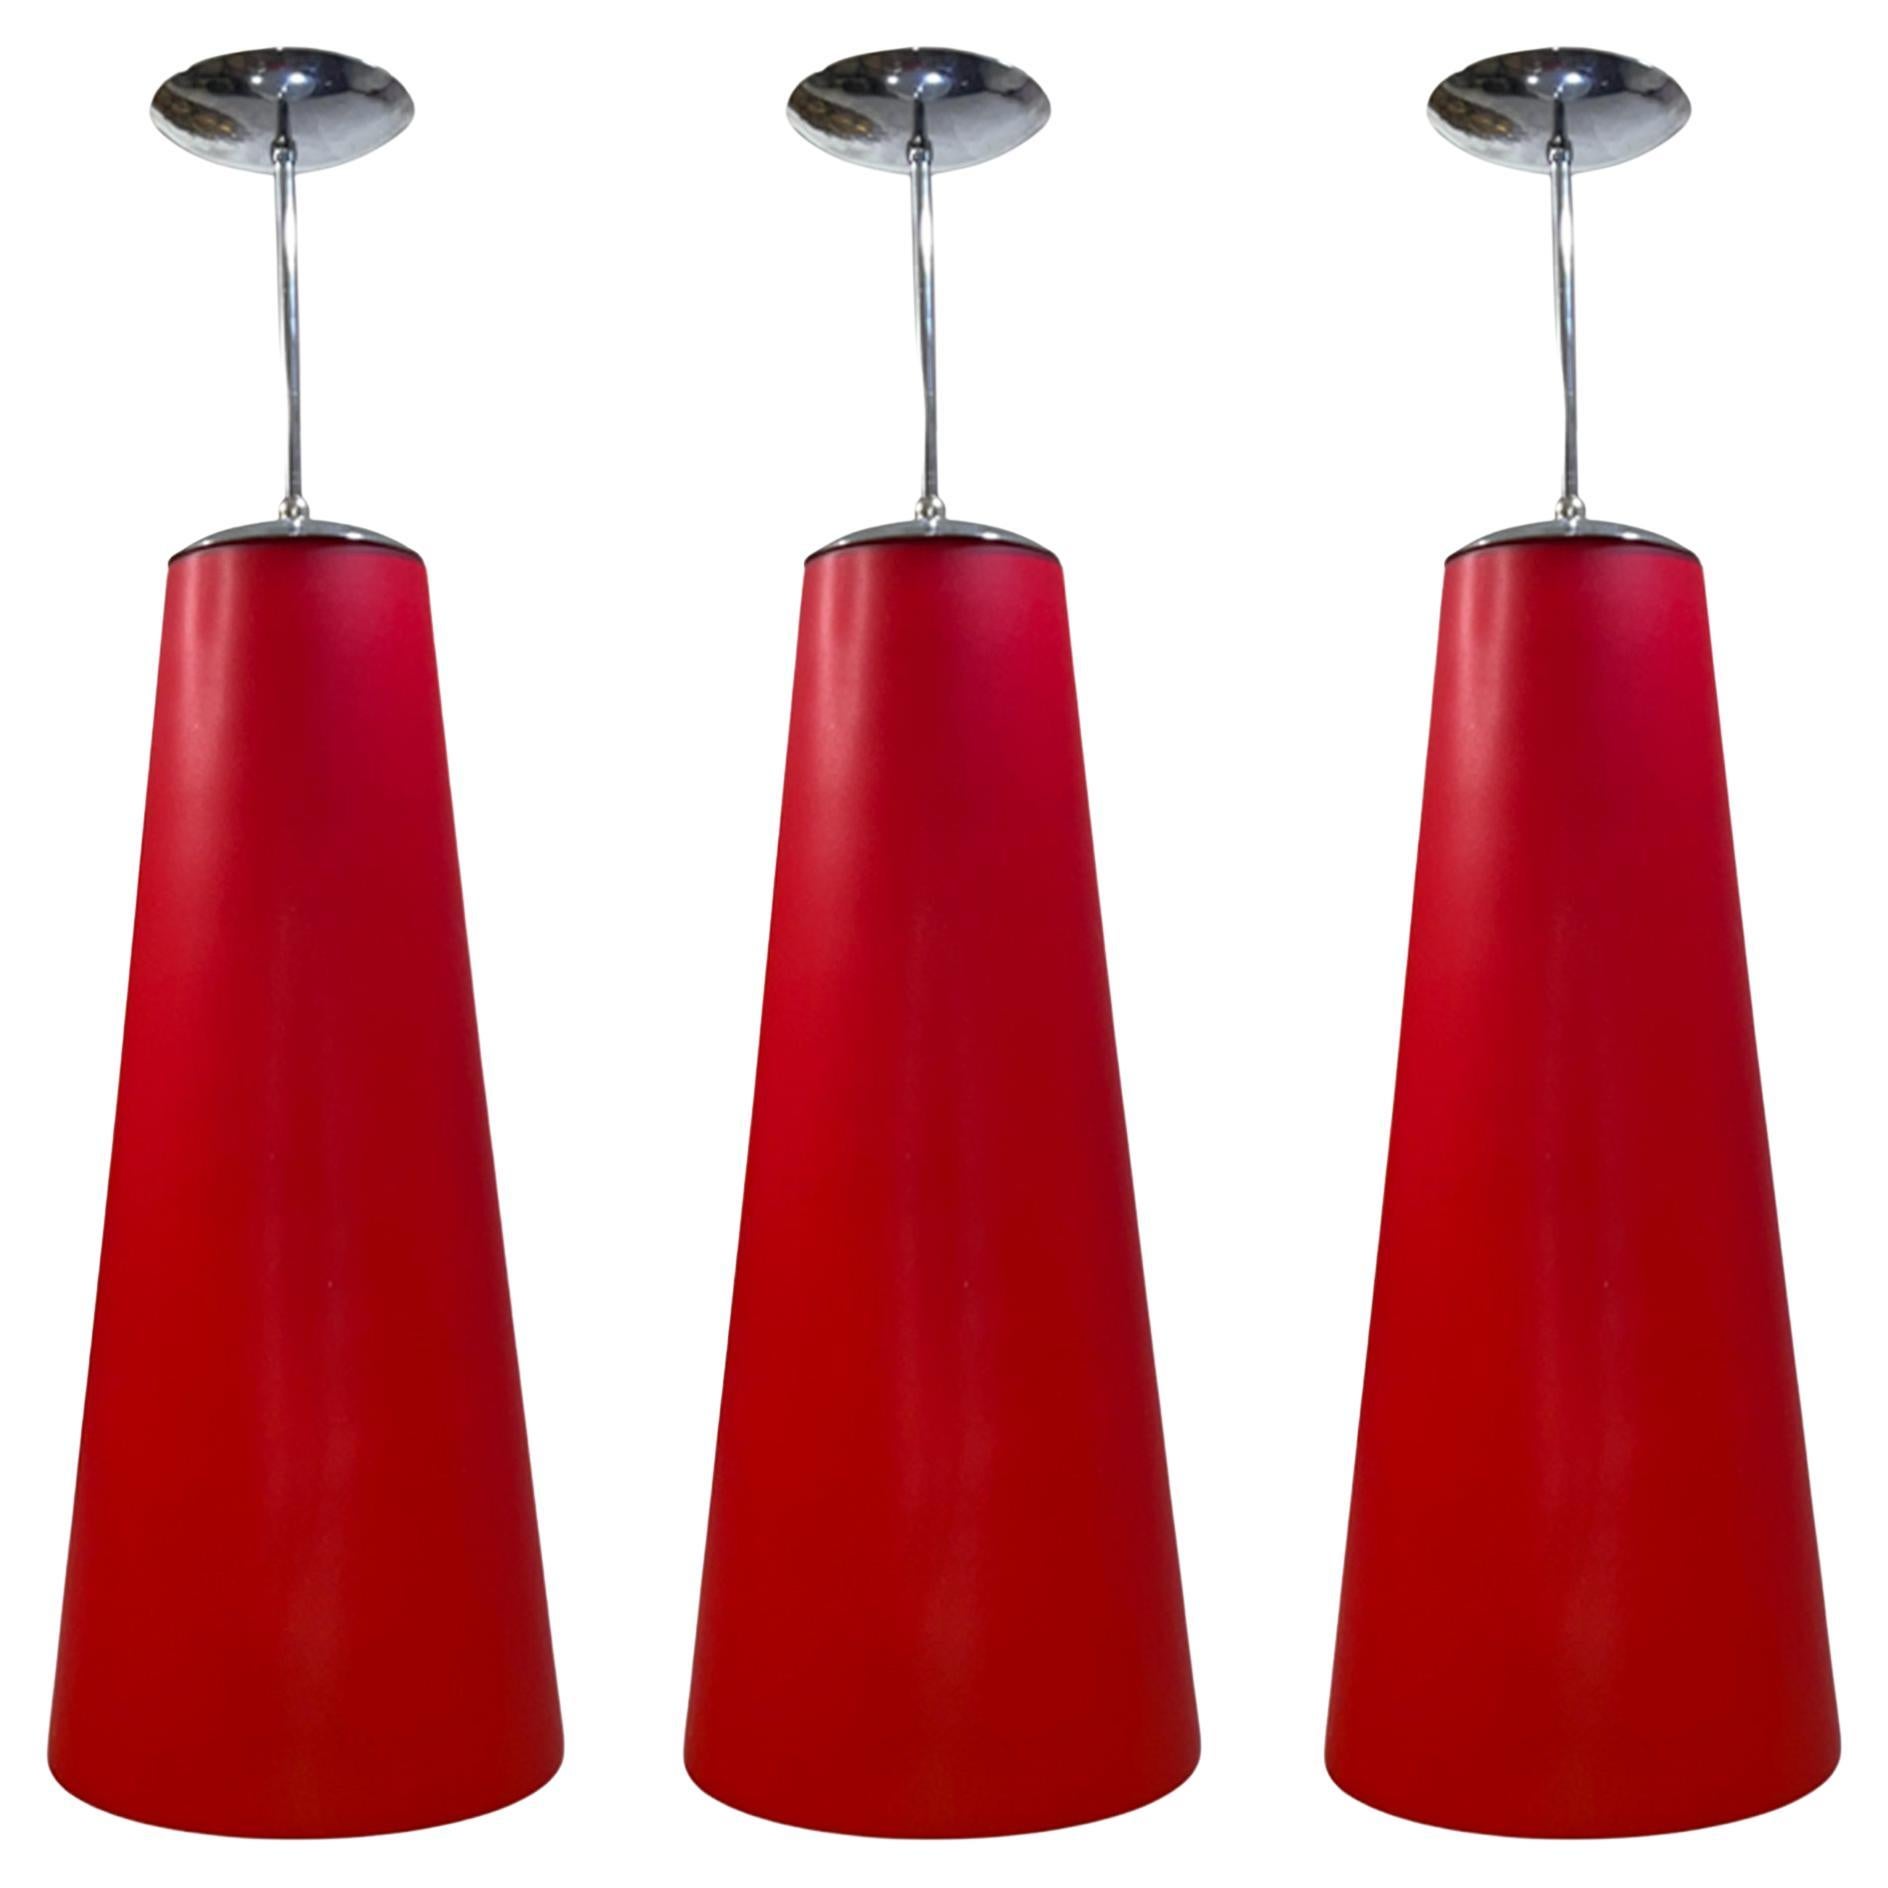 Set of 3 Large Italian Red Glass Pendant Lights For Sale